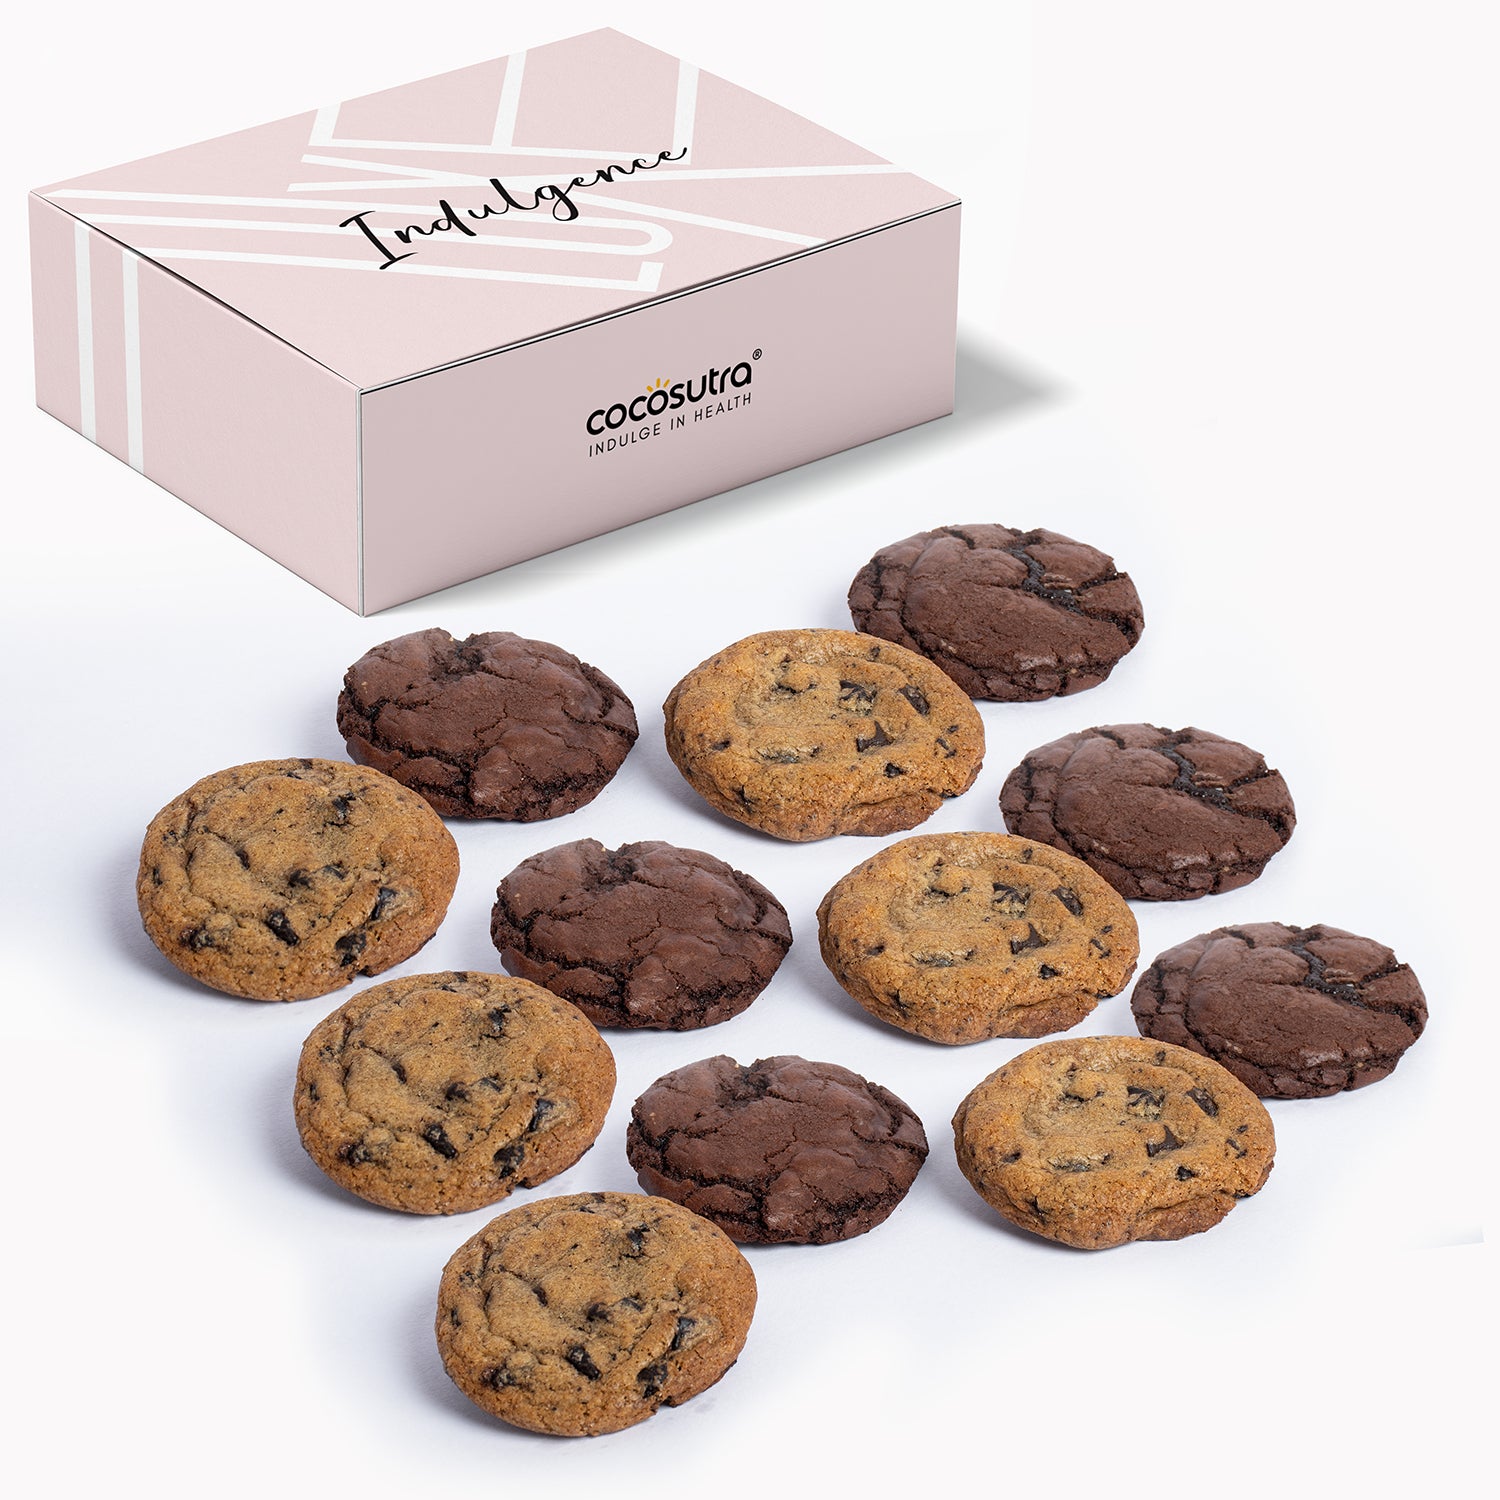 Cocosutra Chunky Chocolate Chip & Fudgy Brownie Cookies - Box of 12 - Eggless